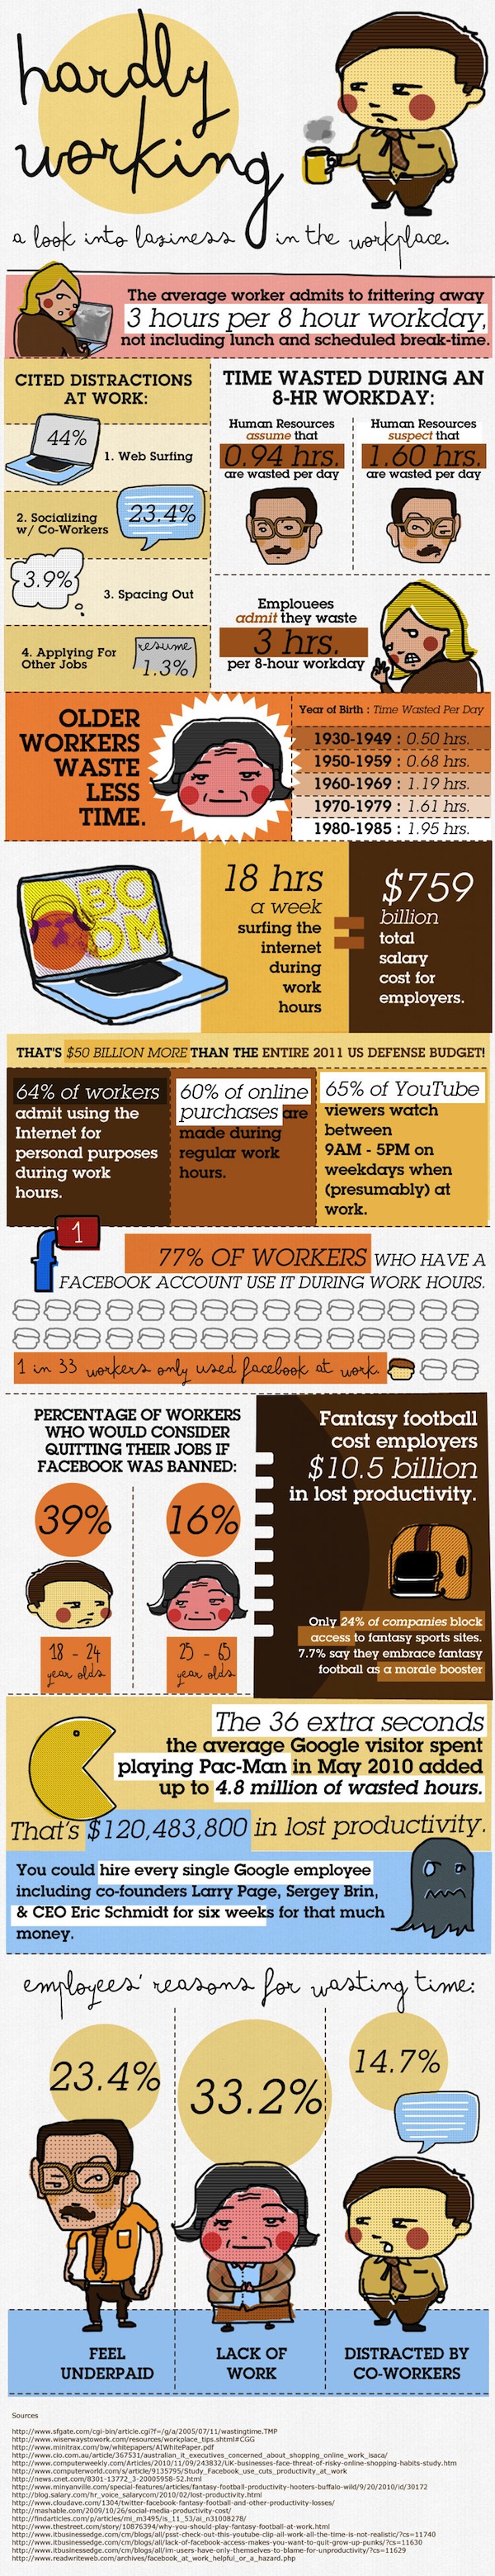 laziness in the workplace infographic